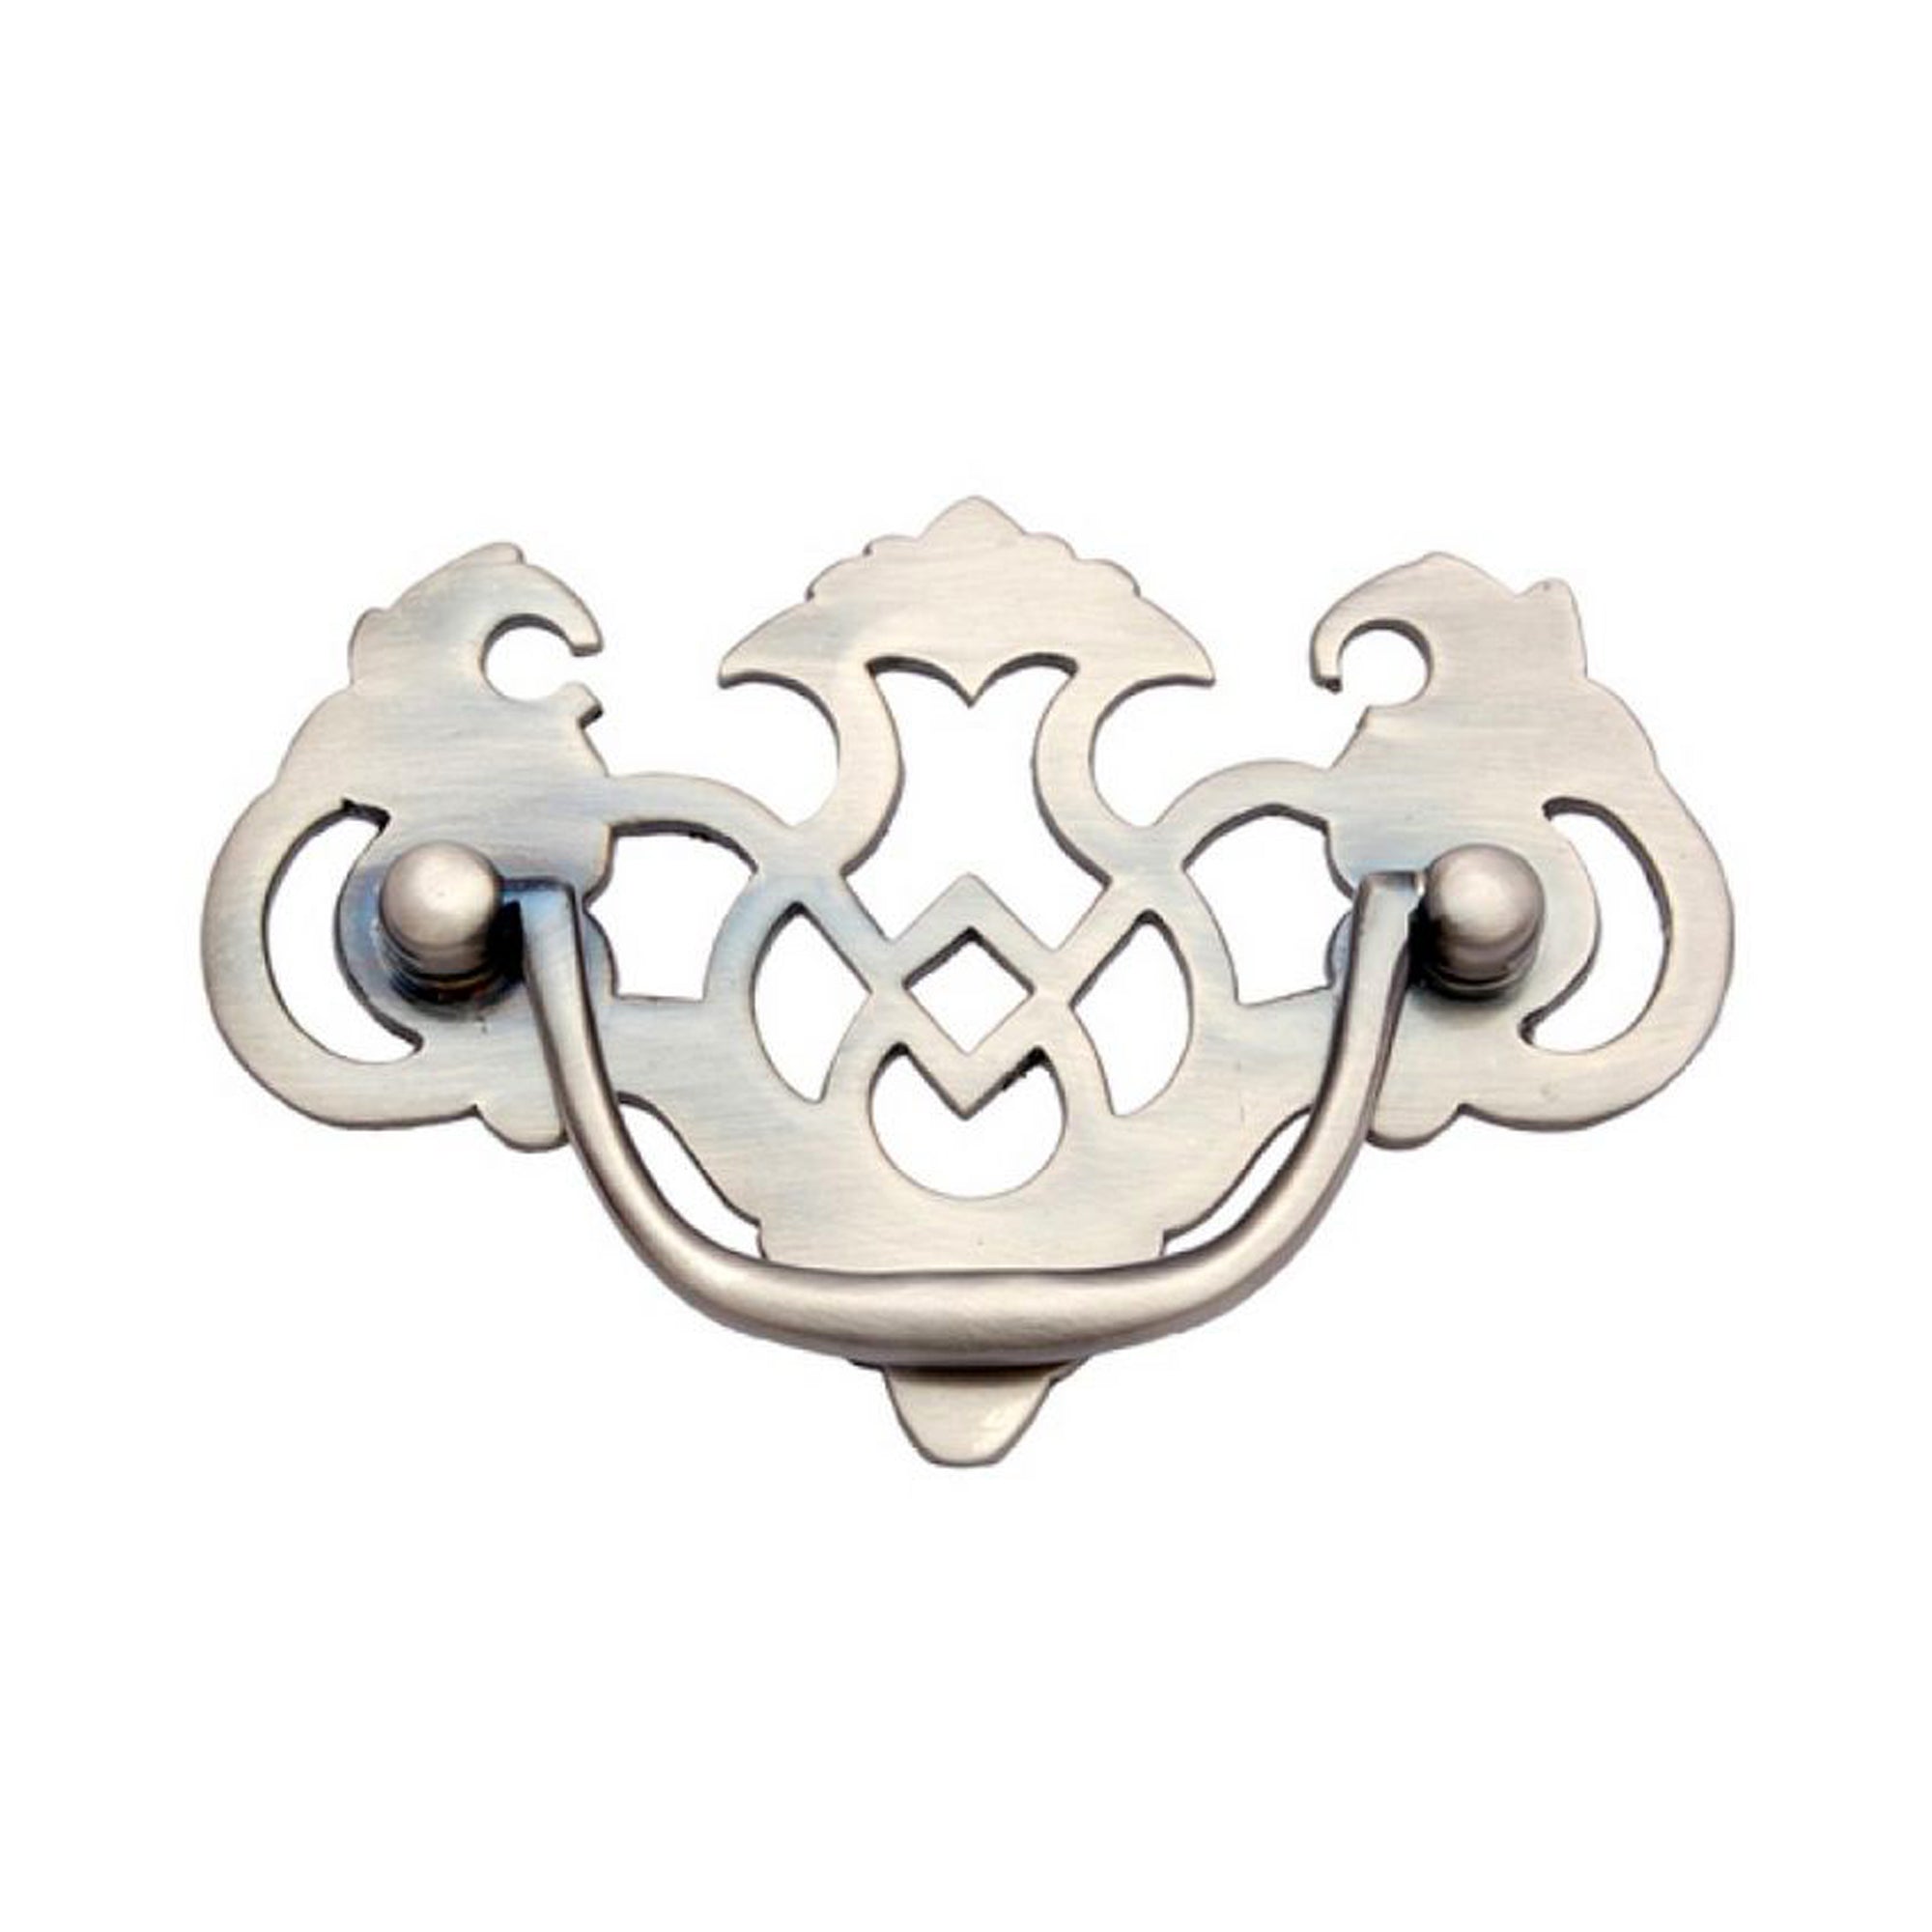 Brass Decorative Drop Pull - Antique Brushed Nickel